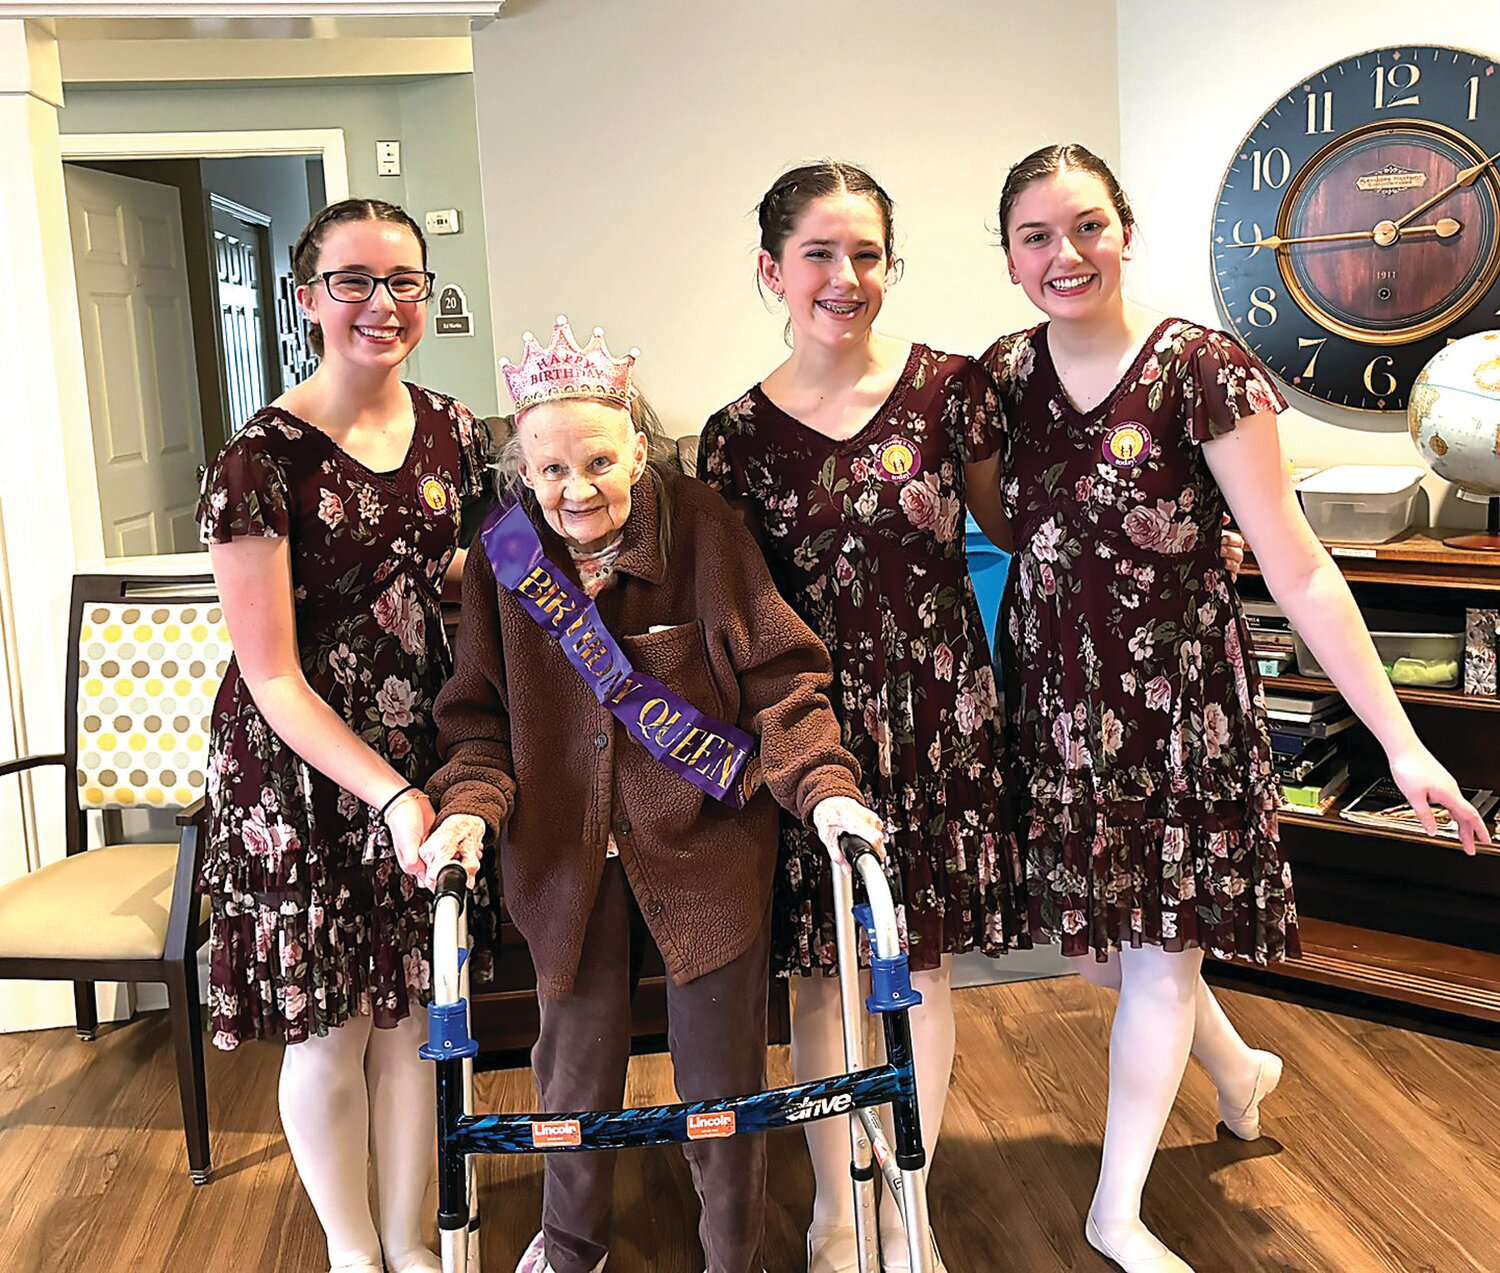 Frances Mollyn shares a smile with ballet dancers on her 100th birthday. Dancers are, from left, Bethany Davis, Julia Worner, and Adleigh Strickland.